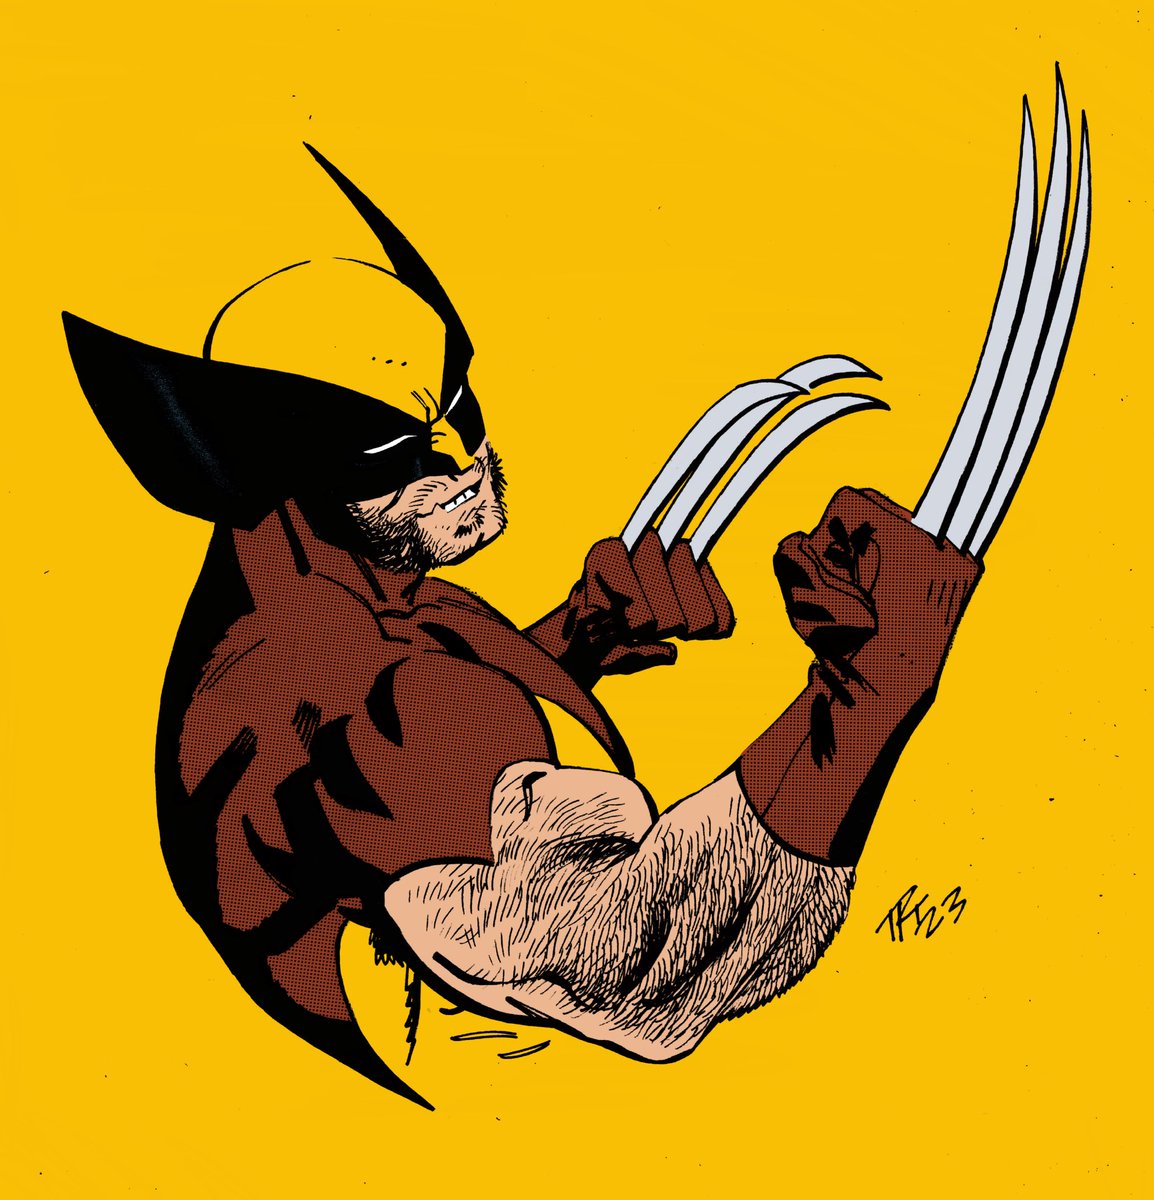 Finished coloring this Wolverine from @tomreillyart